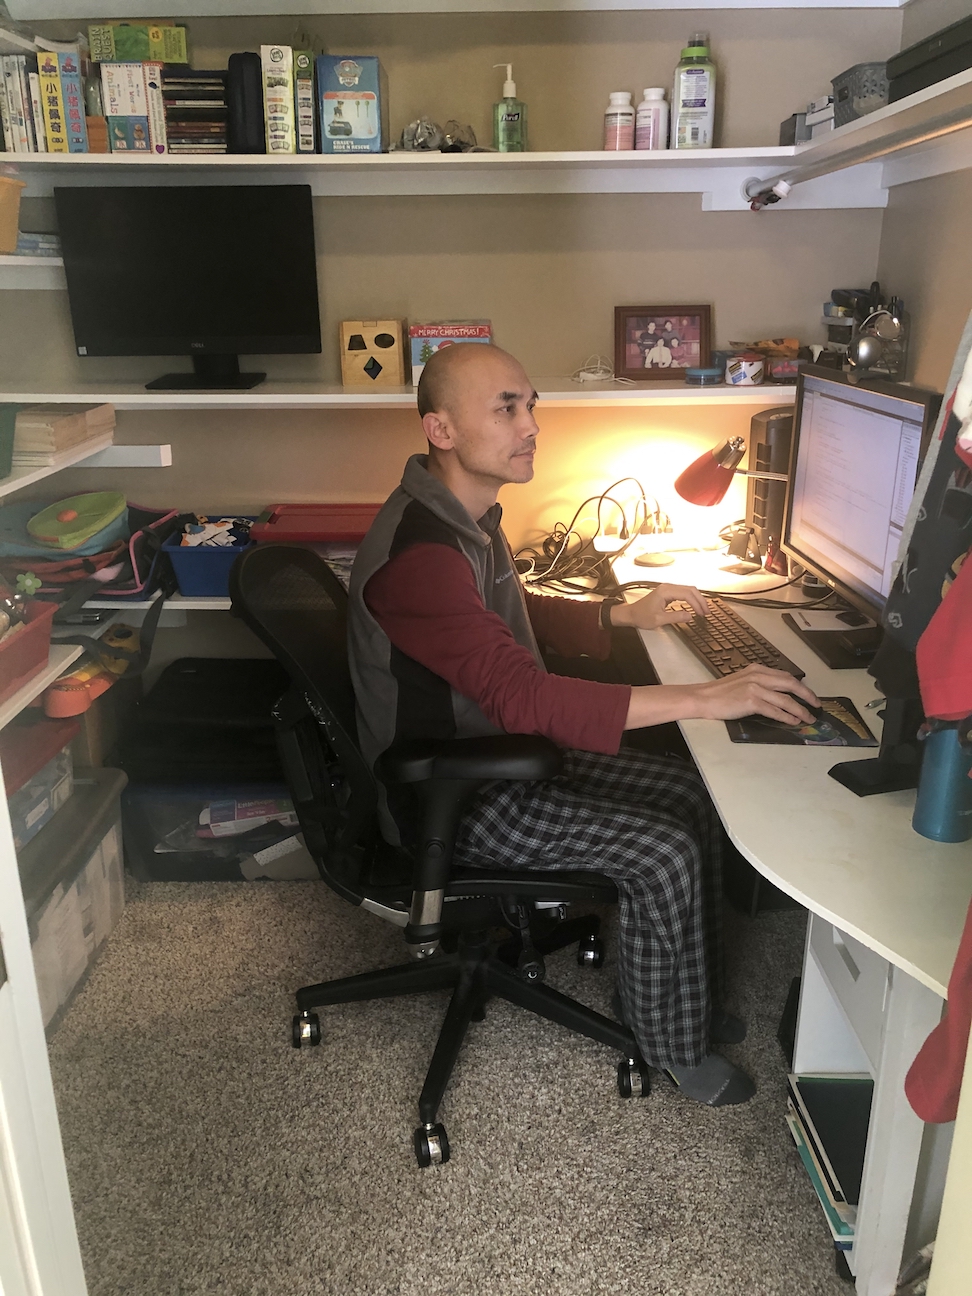 When Austin Peay State University moved spring classes online in response to the coronavirus crisis, Dr. Jiang Li not only had to move three classes online, he had to move his office into a closet at his house.